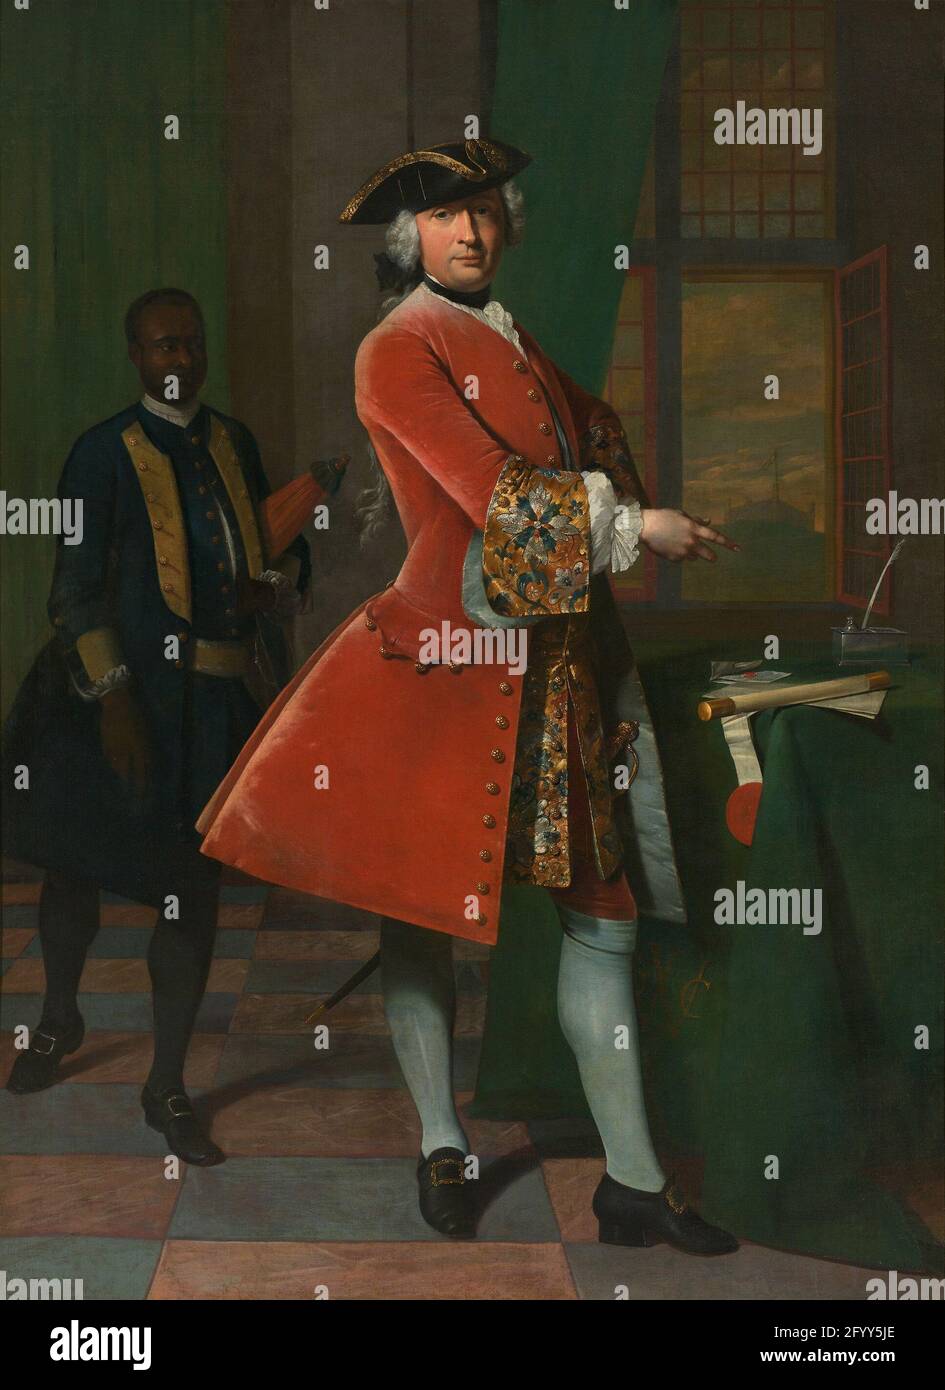 Portrait of Pranger. Jan Pranger was director-general of the Dutch West Company on the Gold Coast (now Ghana) in West Africa from 1730 to 1734. Here he is standing